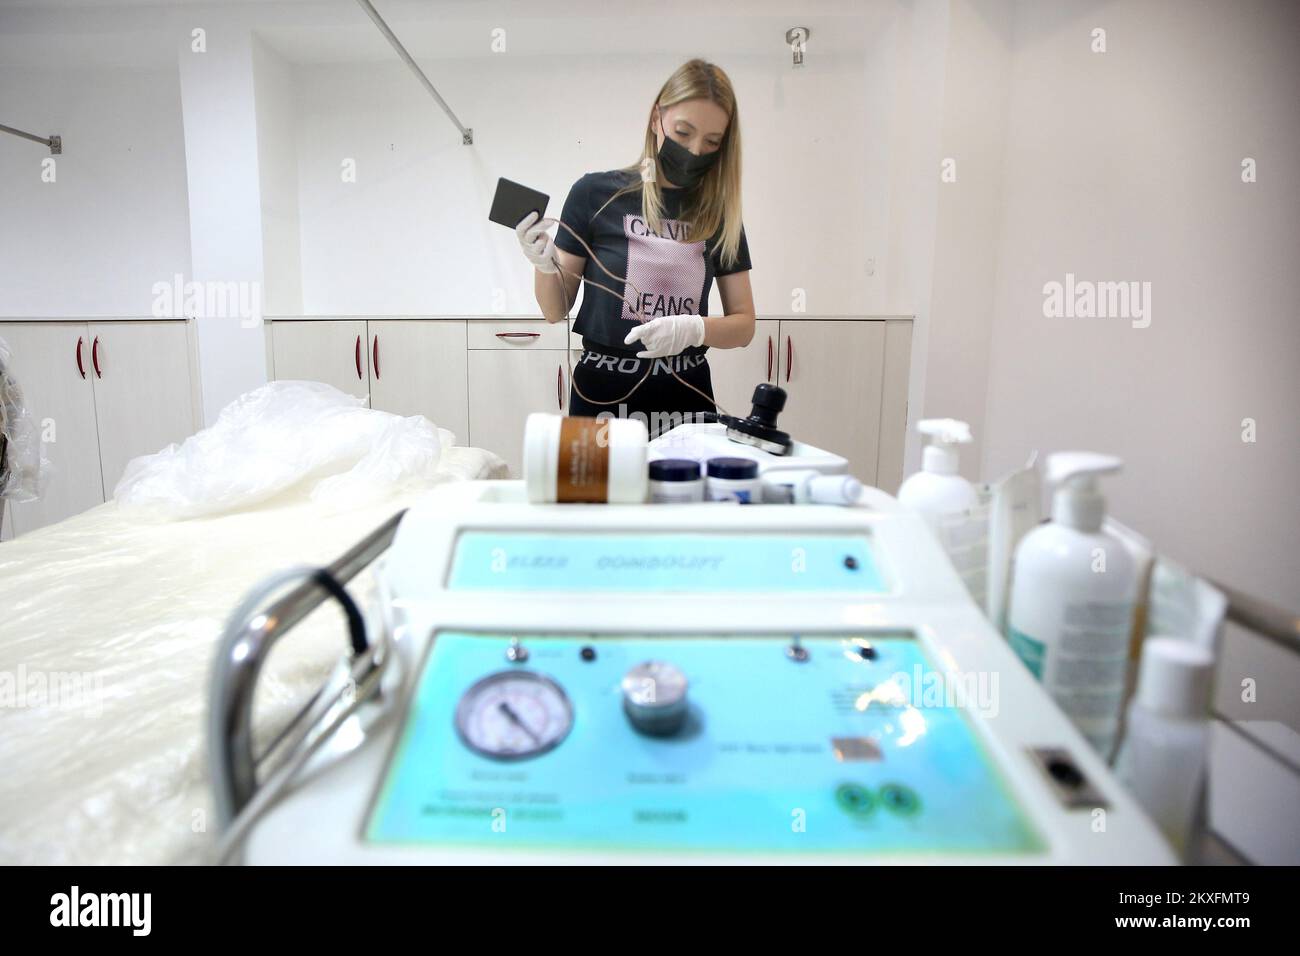 03.05.2020., Sibenik, Croatia - The Darling beauty salon is preparing to reopen according to the instructions of the Civil Protection Staff of the Republic of Croatia in the fight against coronaviruses (COVID-19). Croatia is entering the second phase of relaxing restrictive measures to combat coronavirus infection. Photo: Dusko Jaramaz/PIXSELL  Stock Photo